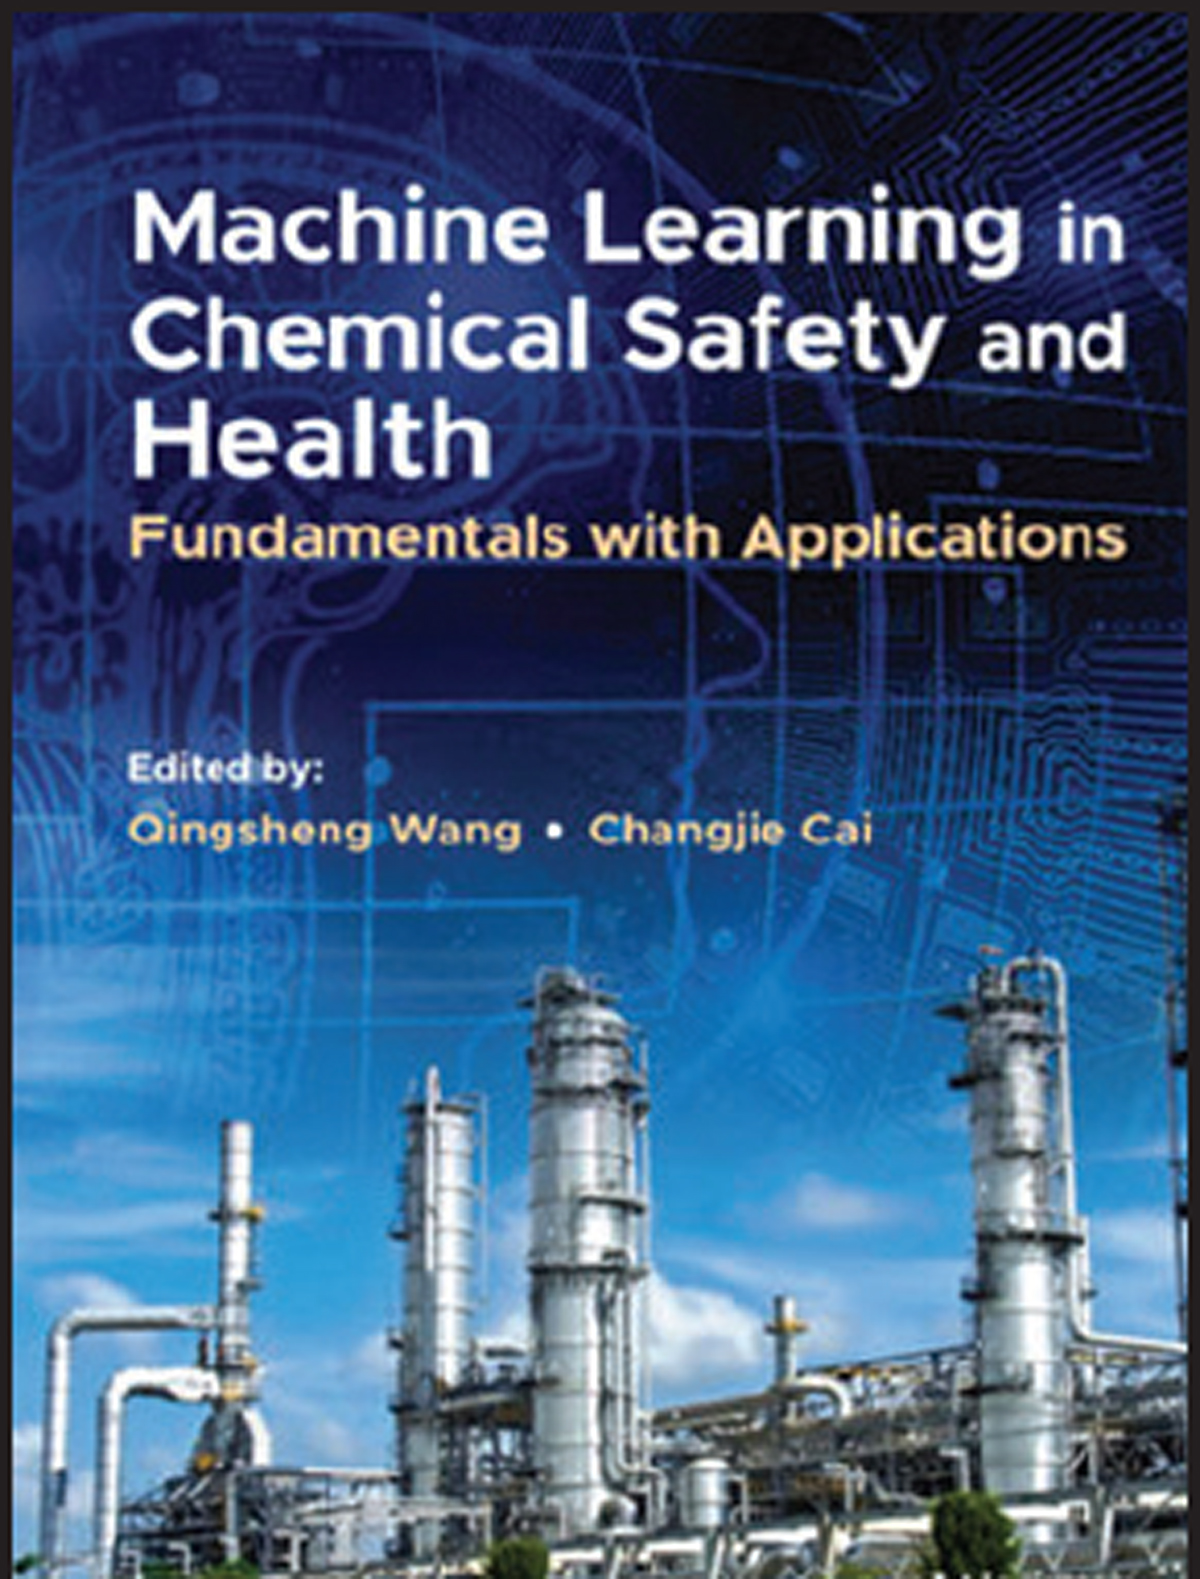 Machine learning algorithms have potential to transform chemical safety-related model development.